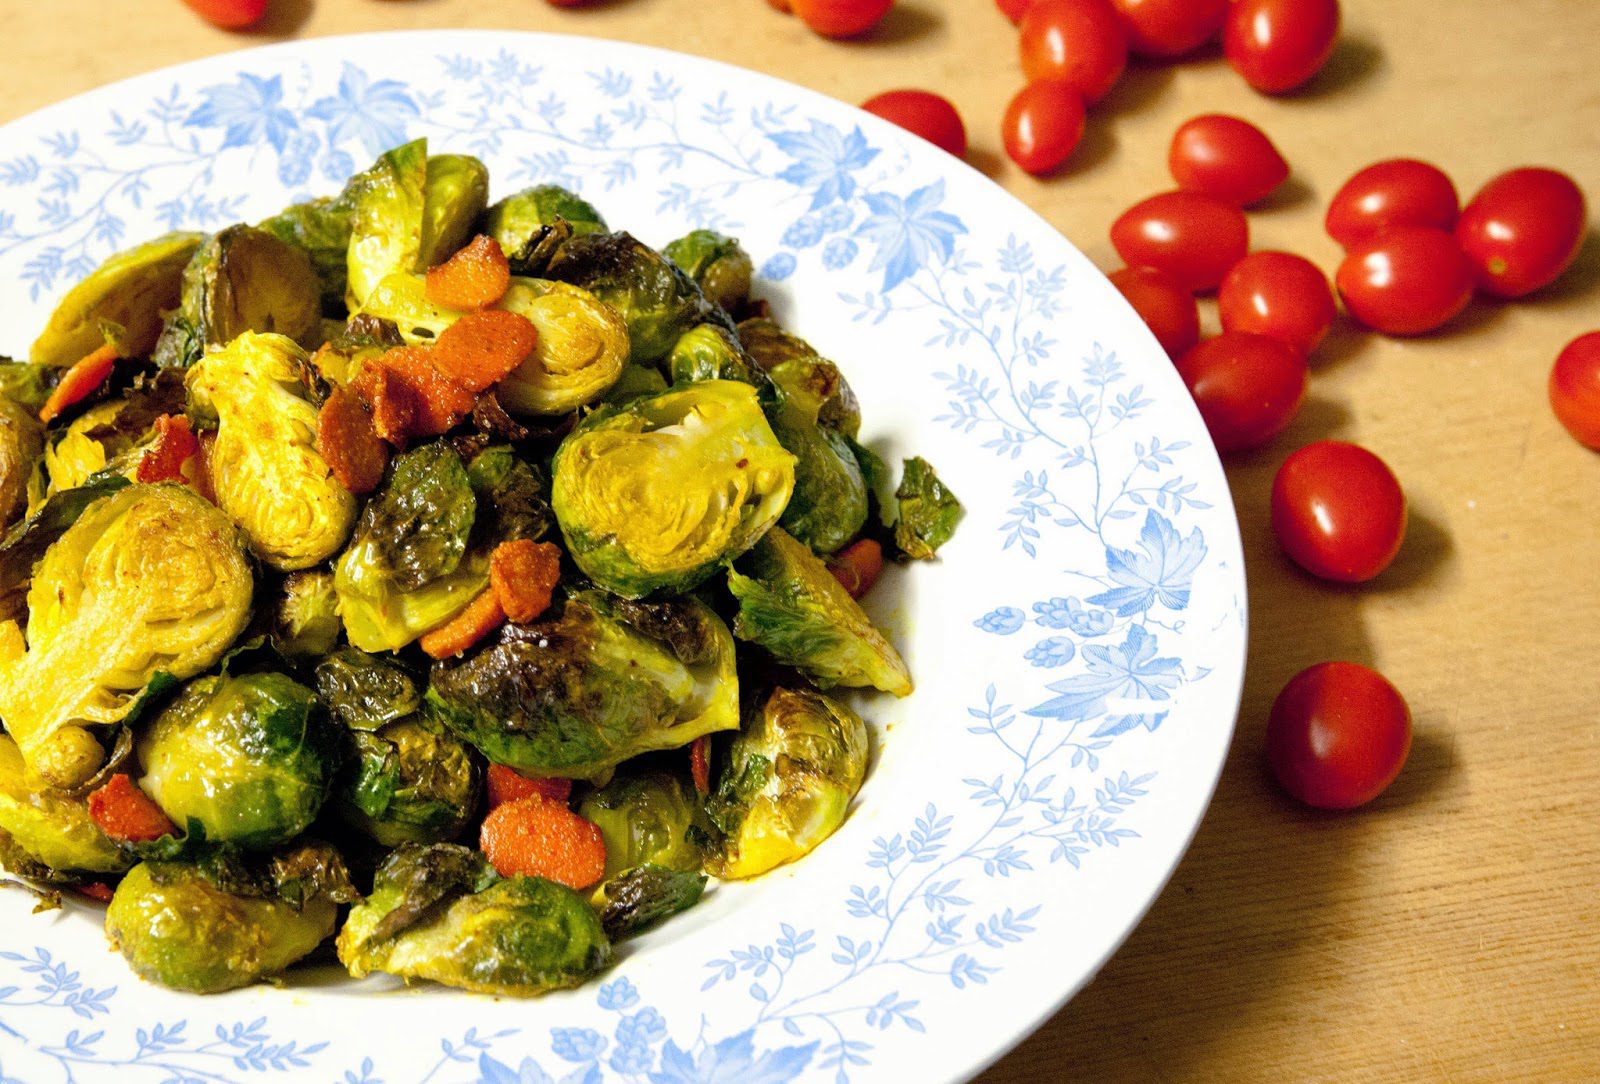 Chilli and Turmeric Brussel Sprouts